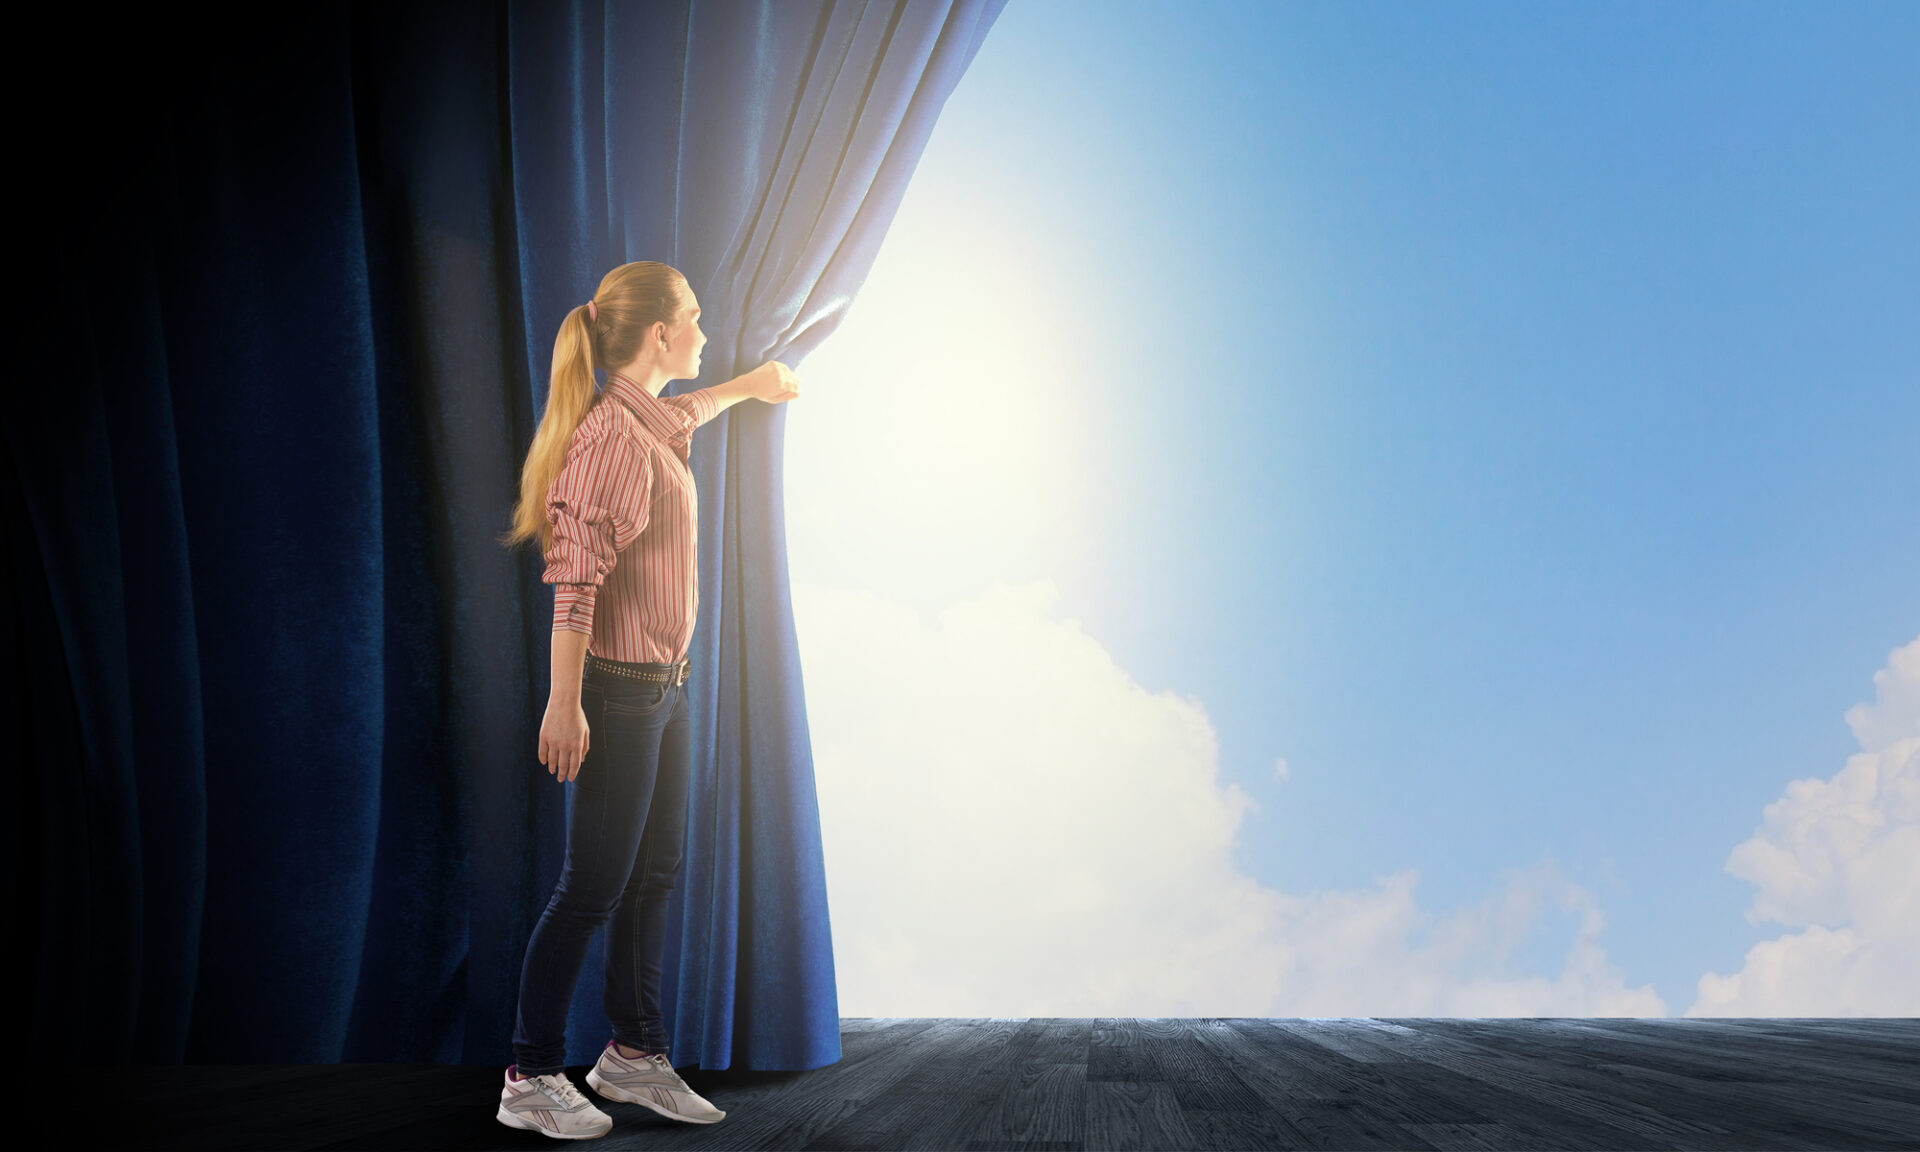 Life transitions - girl pulling back a curtain on a bright sky filled with clouds